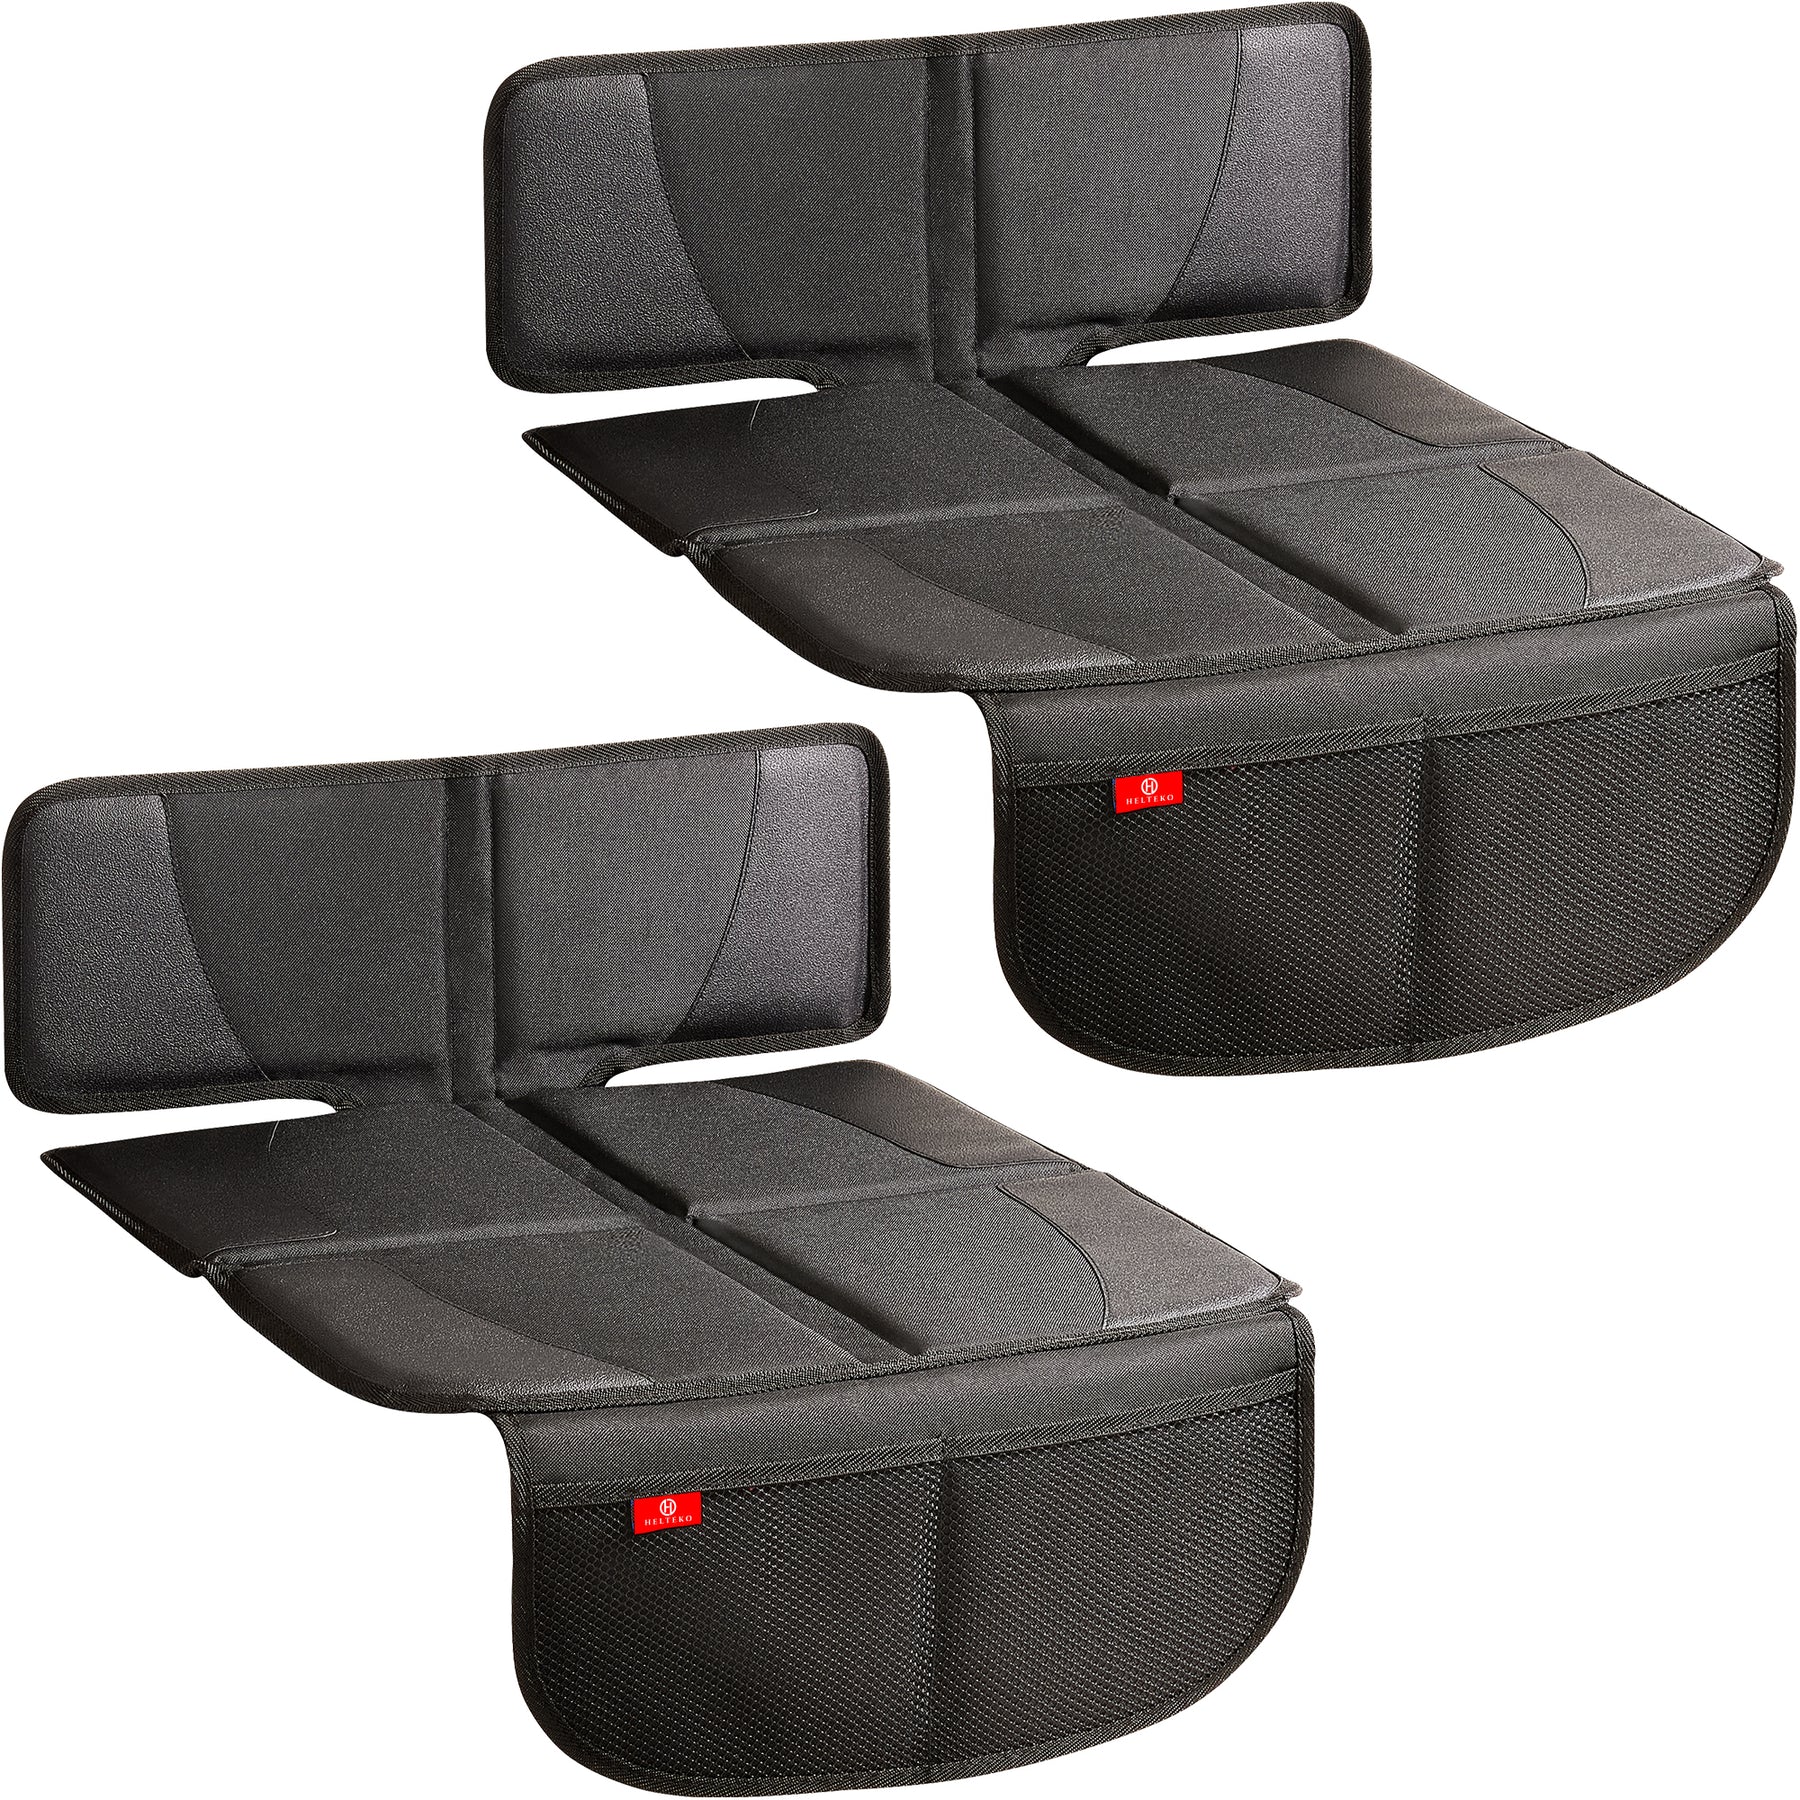 Booster Car Seat Protector (Black)